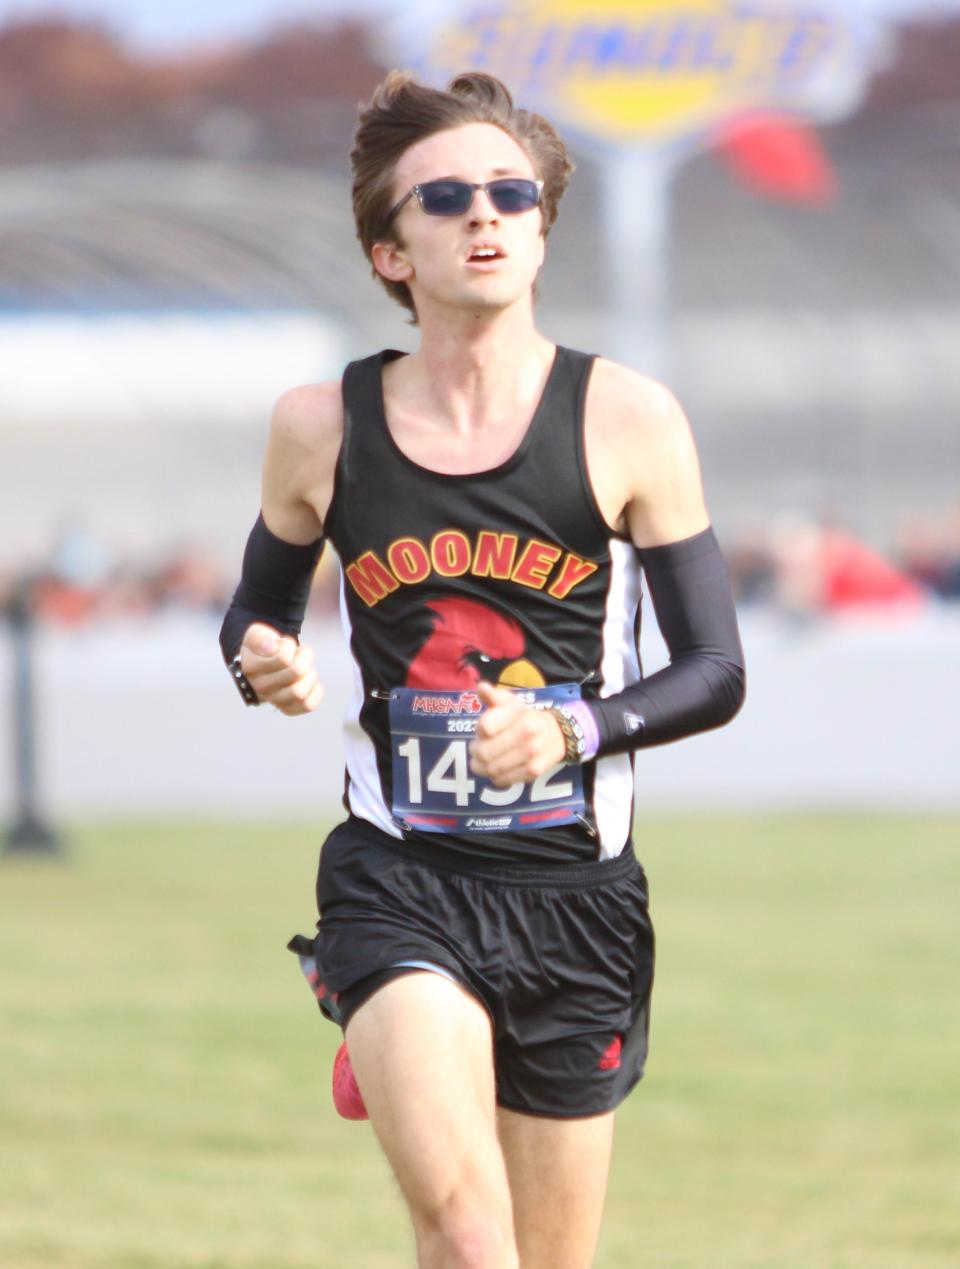 Cardinal Mooney's Tyler Lenn won the Division 4 boys state championship at the 2023 MHSAA cross country state finals at Michigan International Speedway on Saturday.